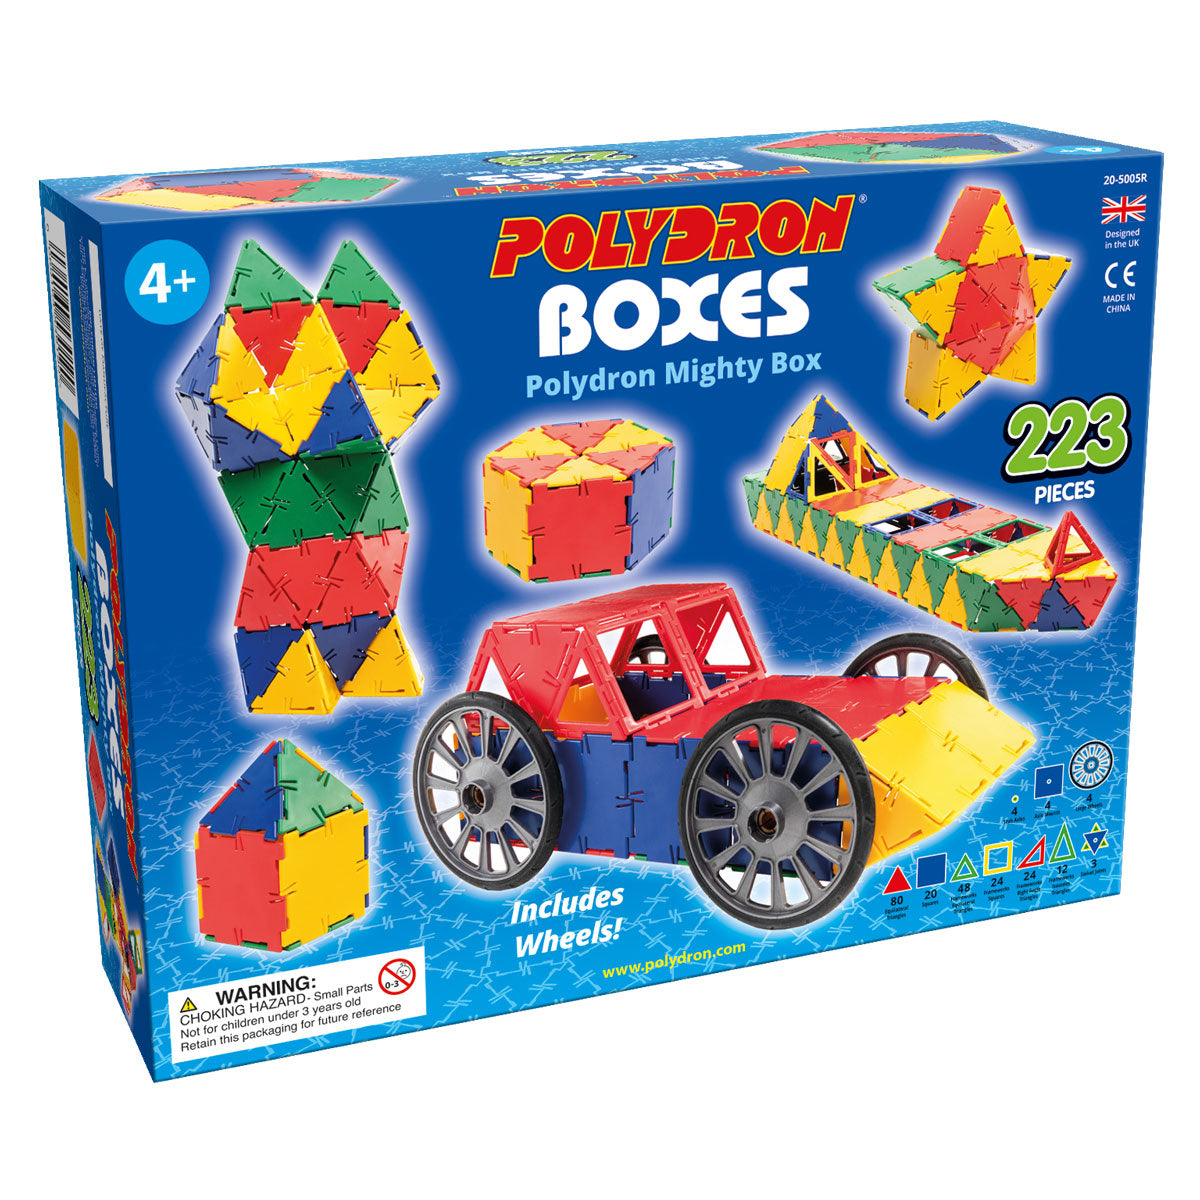 Polydron Mighty Box, The Polydron Mighty Box is a highly versatile construction system used in schools worldwide. With this set, children can explore and build a wide variety of 2D and 3D models, allowing their creativity and problem-solving skills to flourish.One of the standout features of the Polydron Mighty Box is the inclusion of wheels, which enable the construction of moving vehicles. This feature adds an exciting element to the building process, allowing children to create functional models that can